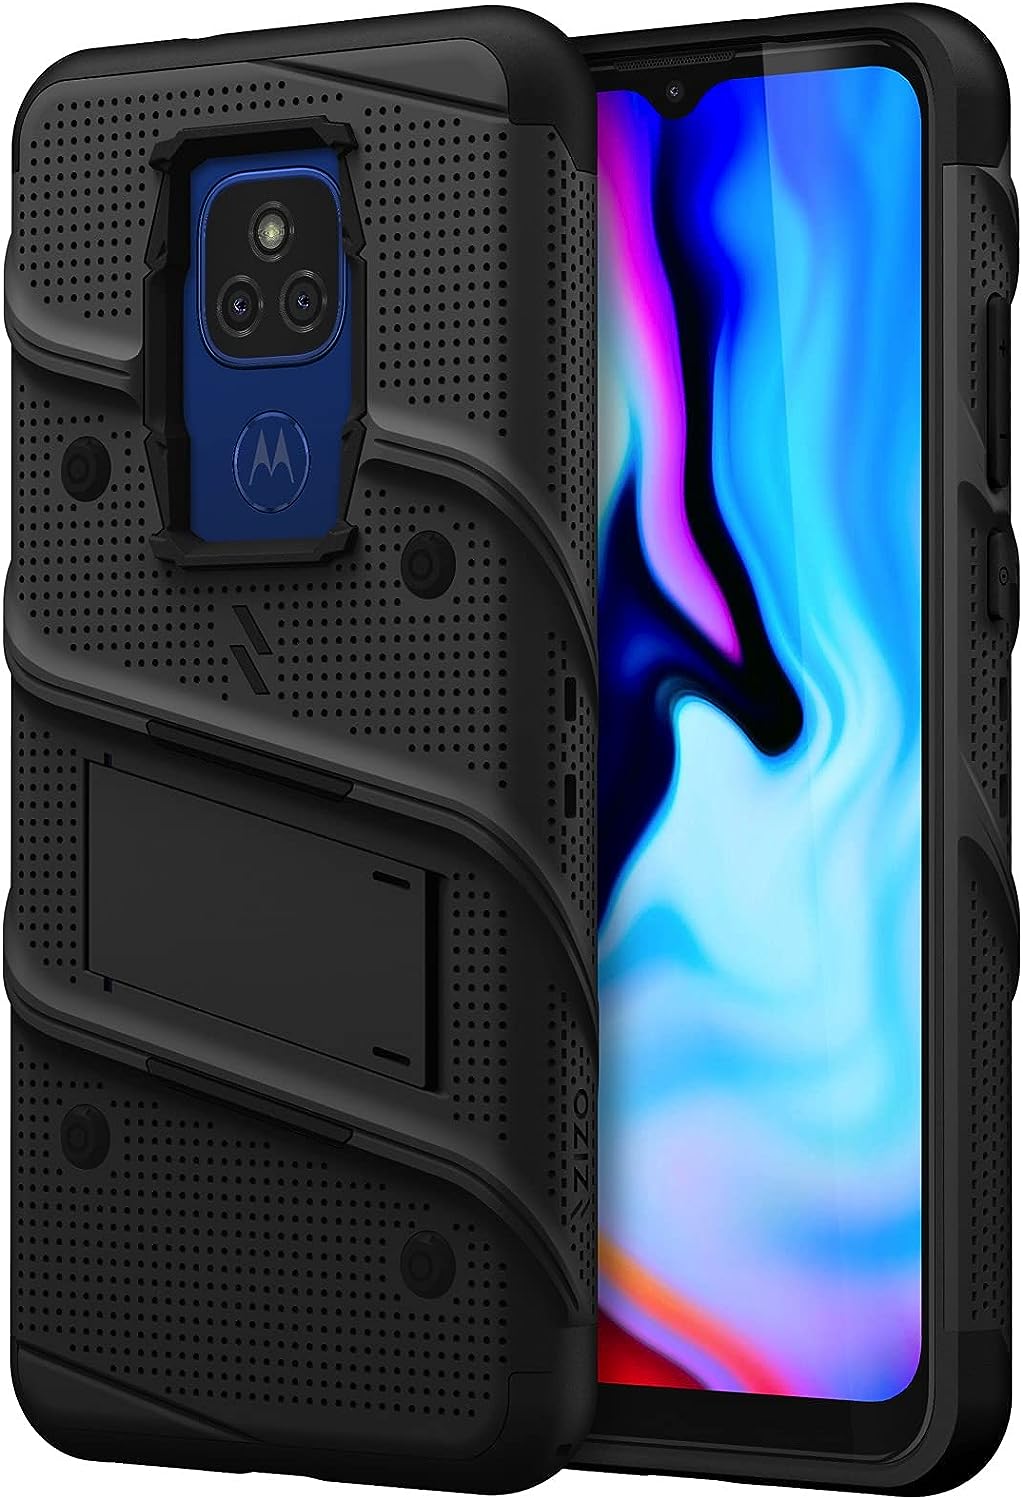 Zizo Bolt Case for Moto G Play (2021) with Built-in Kickstand and Lanyard - Black